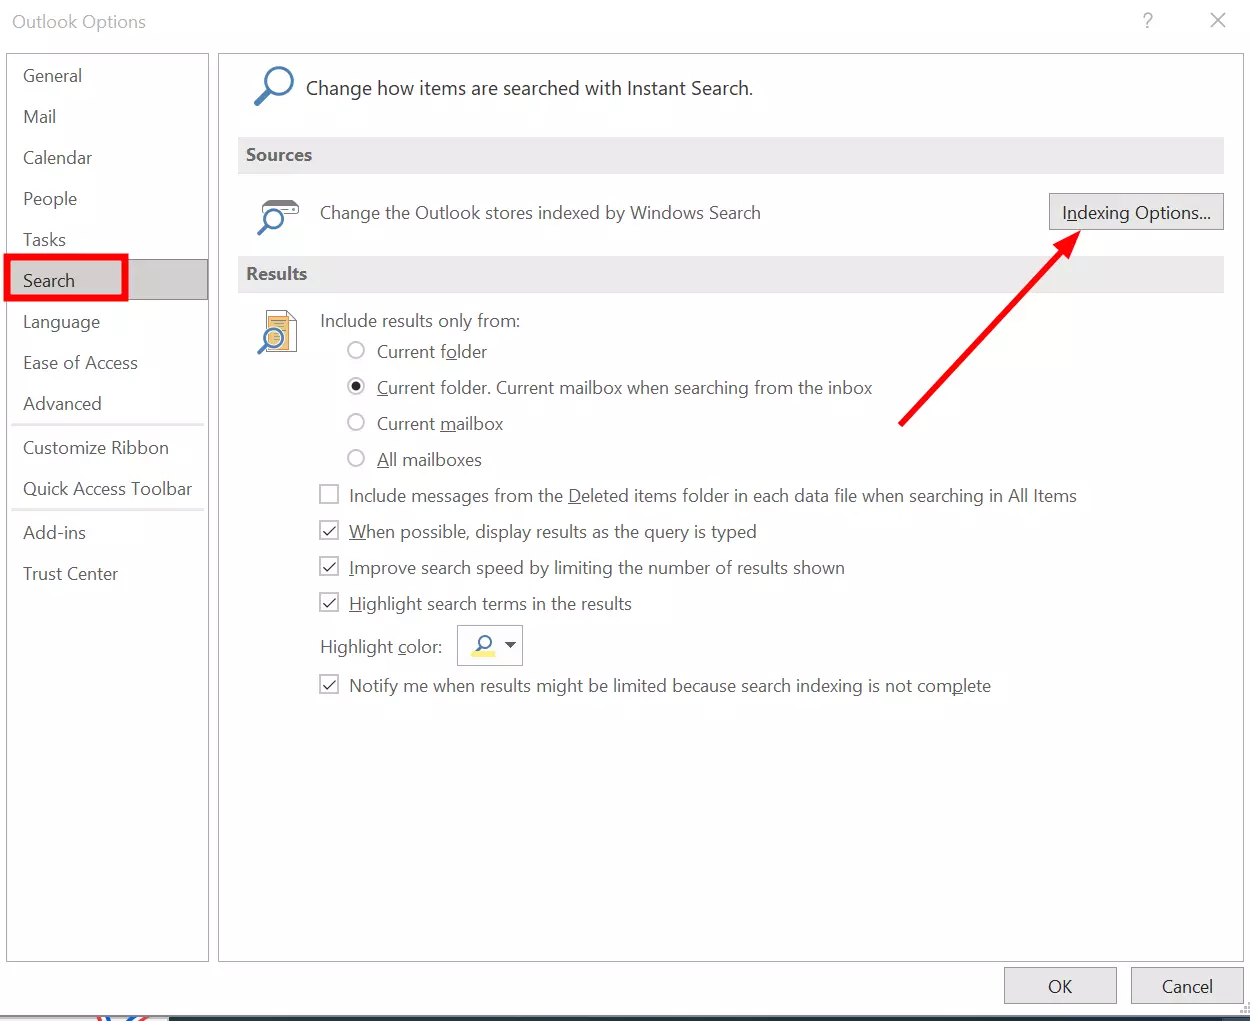 Access "Indexing Options" via Search in Outlook